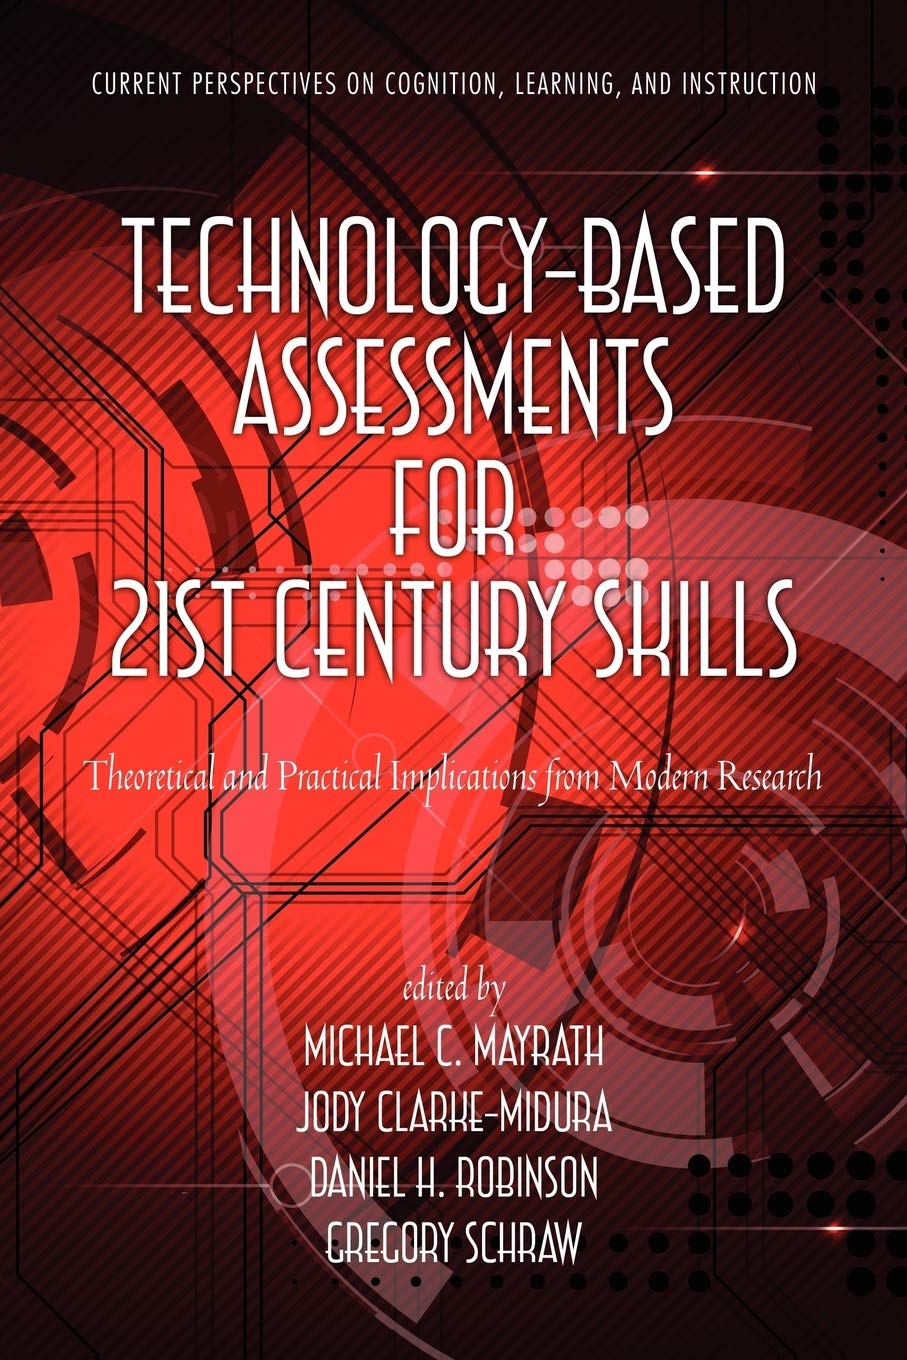 Technology-Based Assessments for 21st Century Skills: Theoretical and Practical Implications from Modern Research (Current Perspectives on Cognitio...